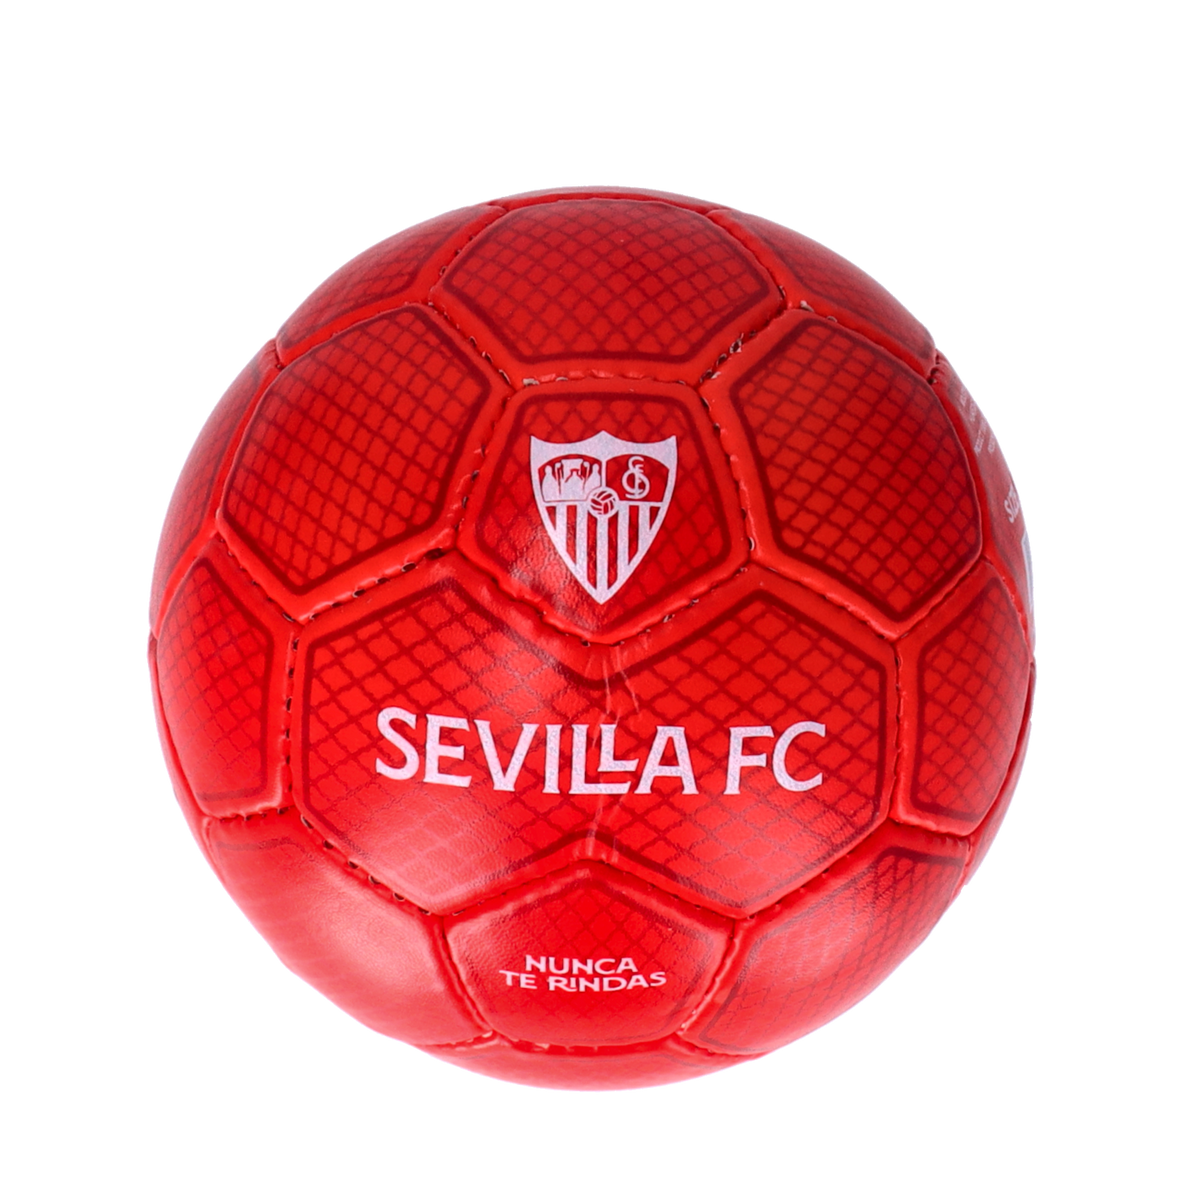 Red ball S2 23/24